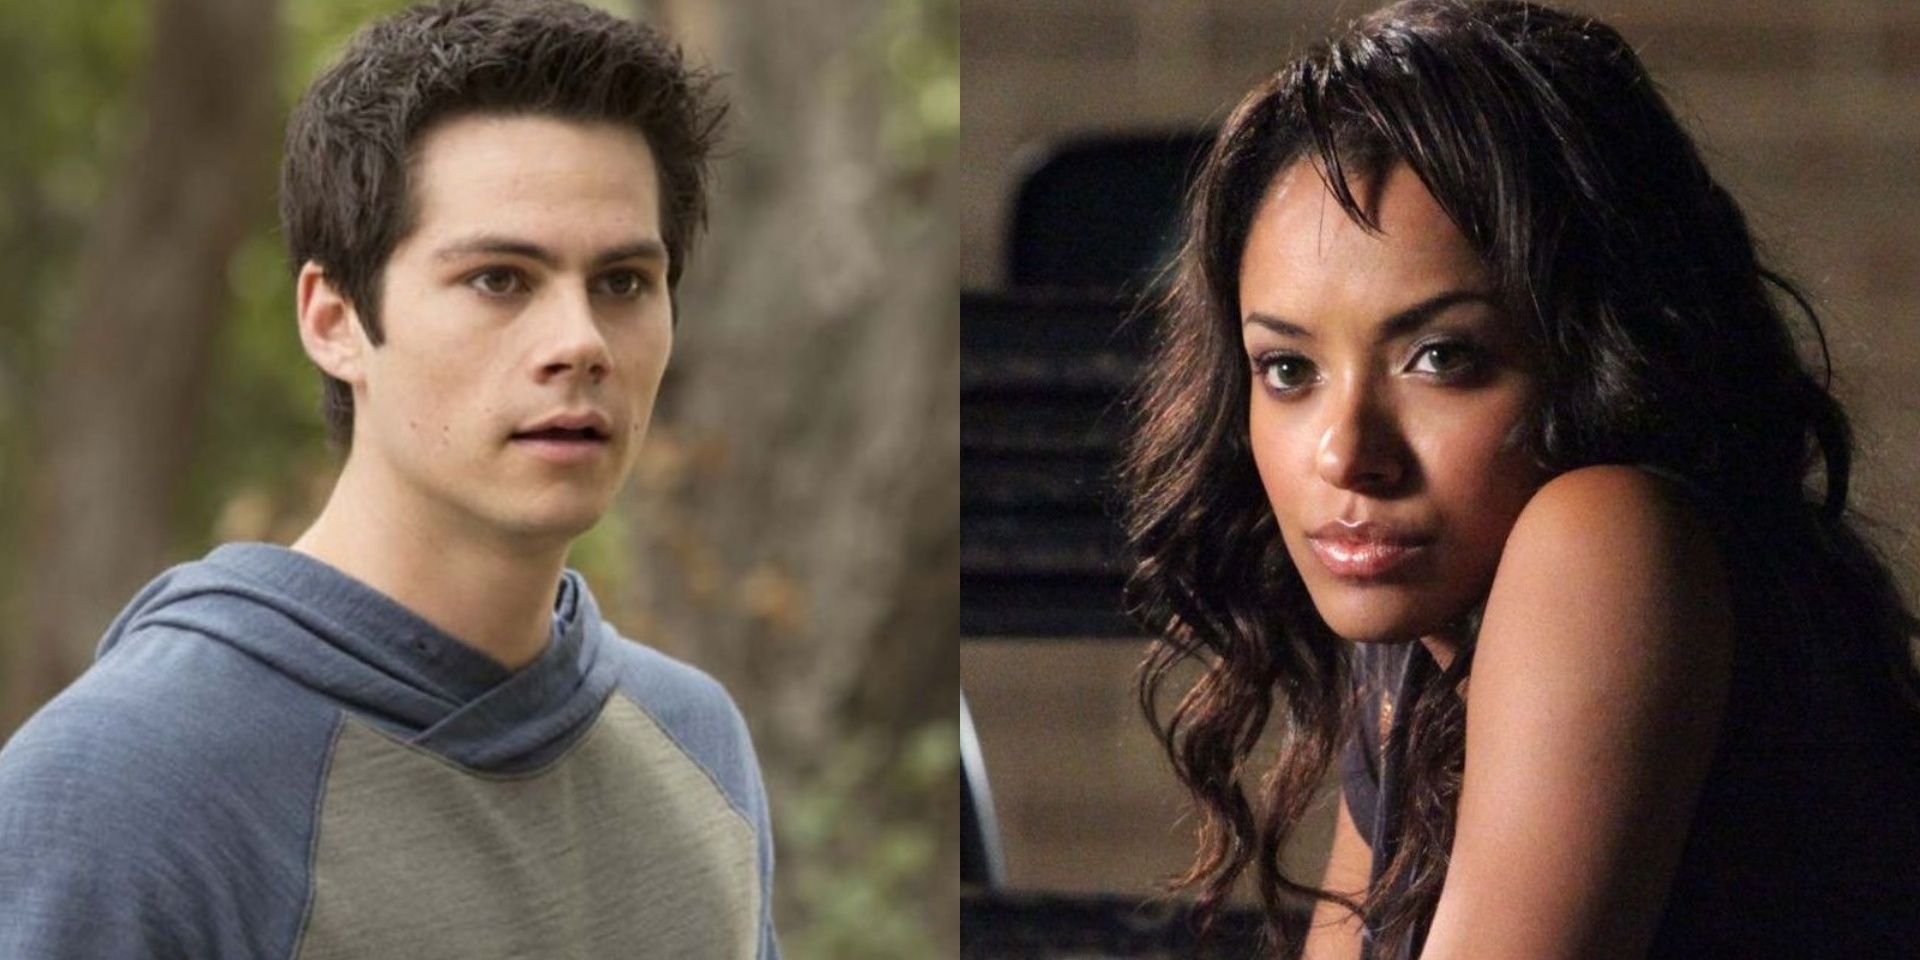 Stiles and Bonnie split photo from teen wolf and vampire diaries